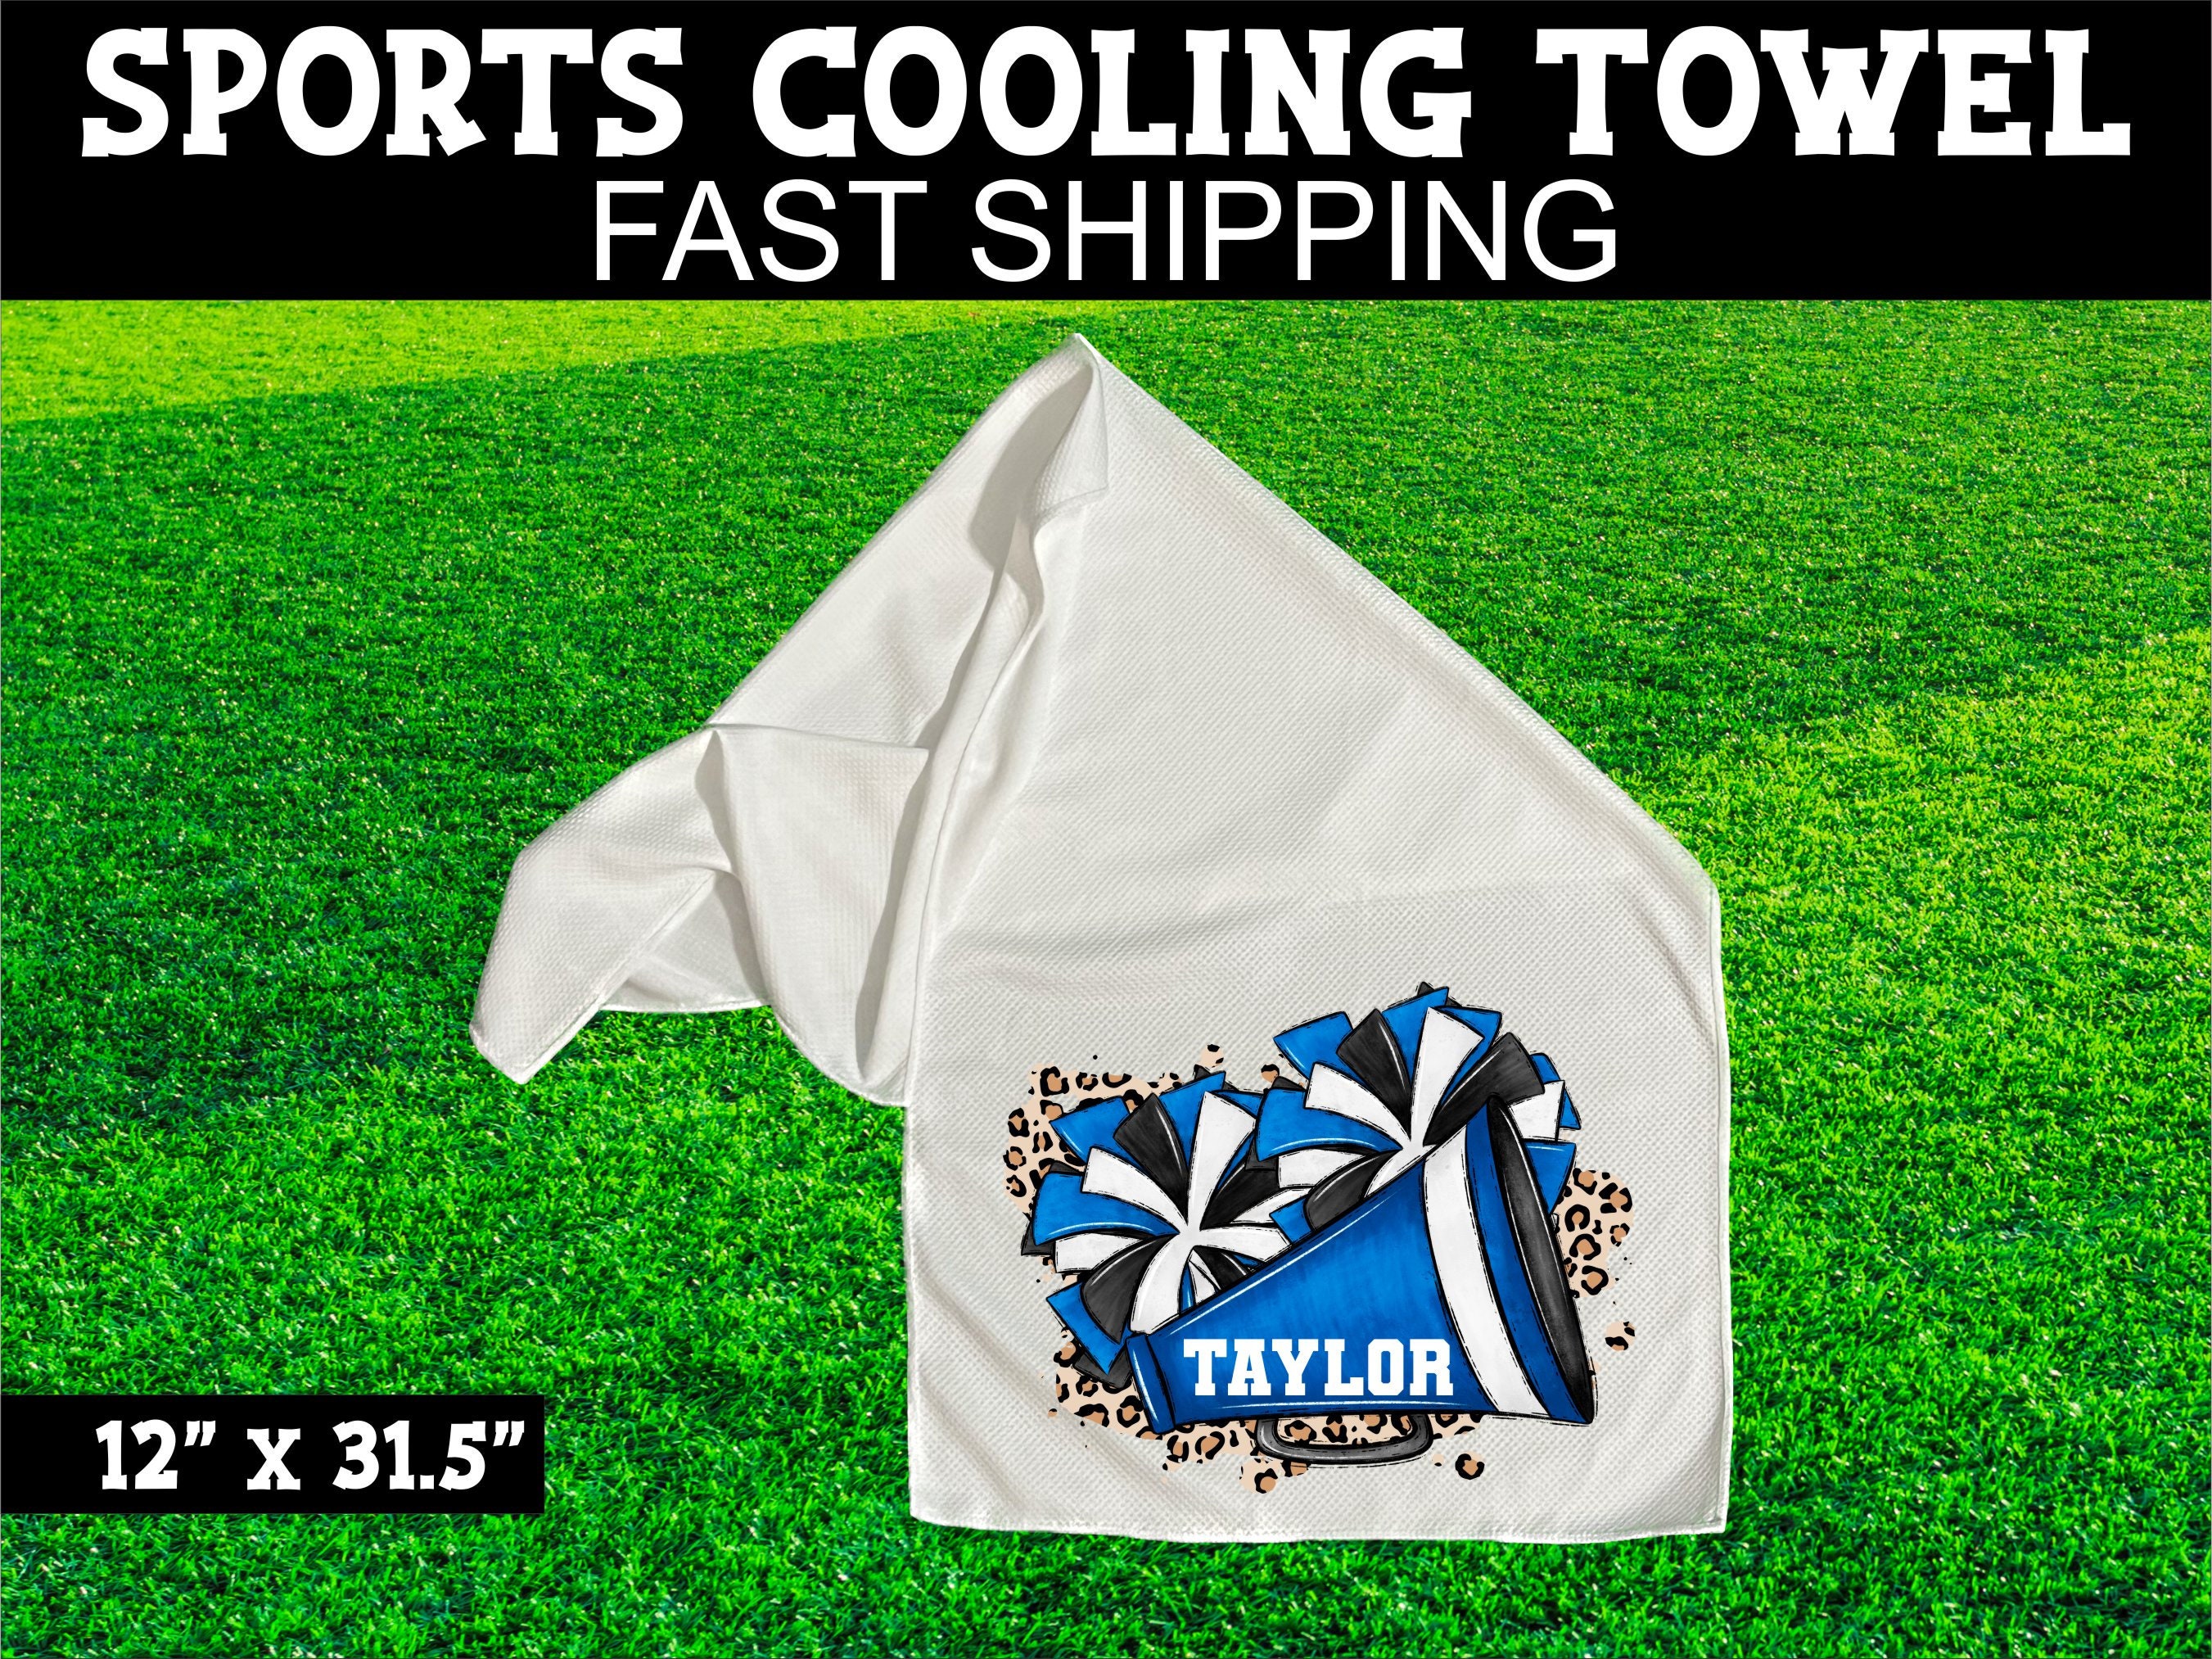 Custom Cold Towels for Sports with Print Cheap Icy Cool Towels w